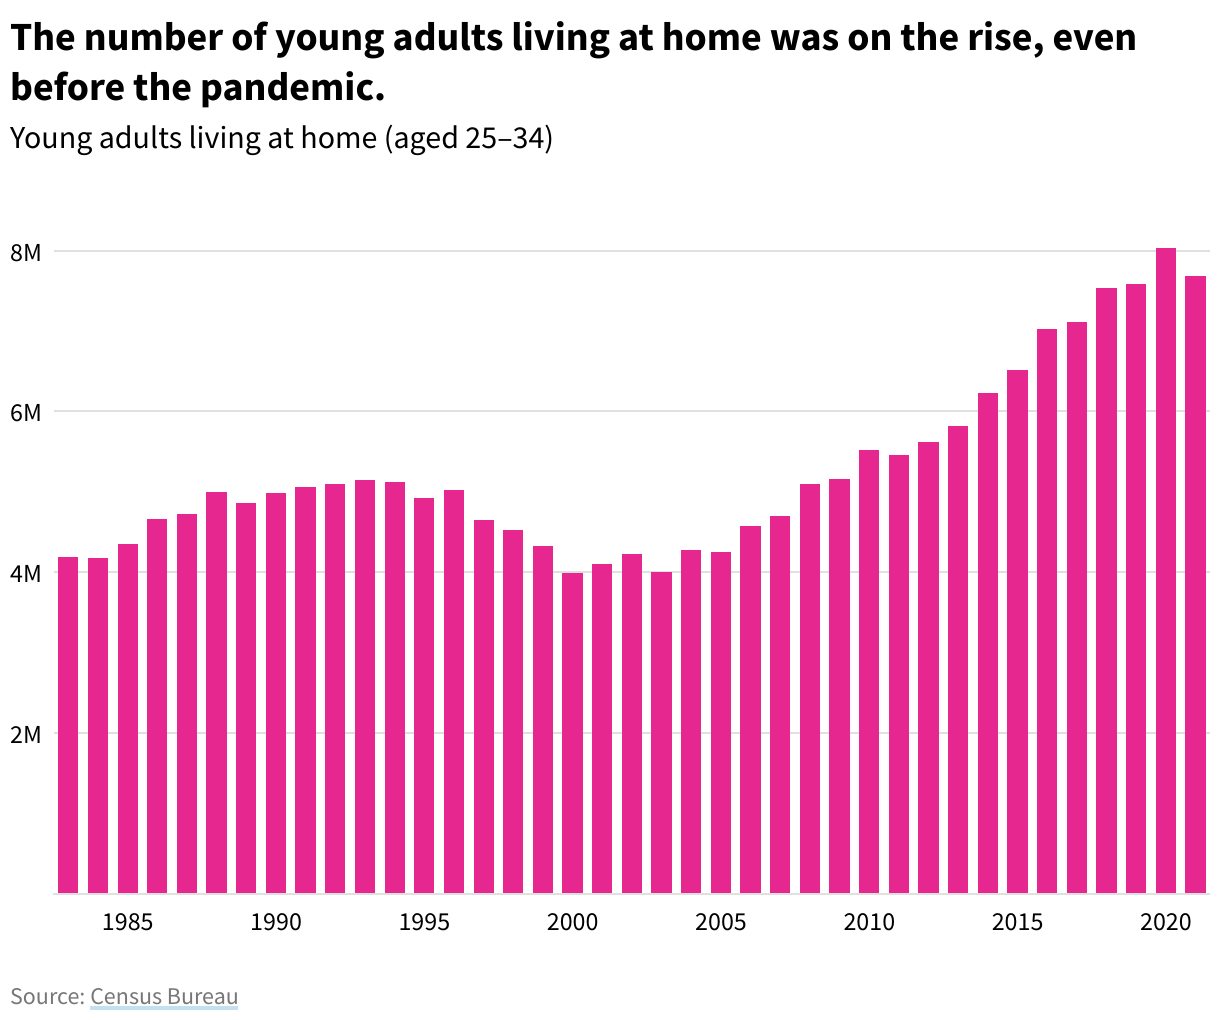 Bar chart showing the number of young adults living at home with an upward trend since the year 2000.